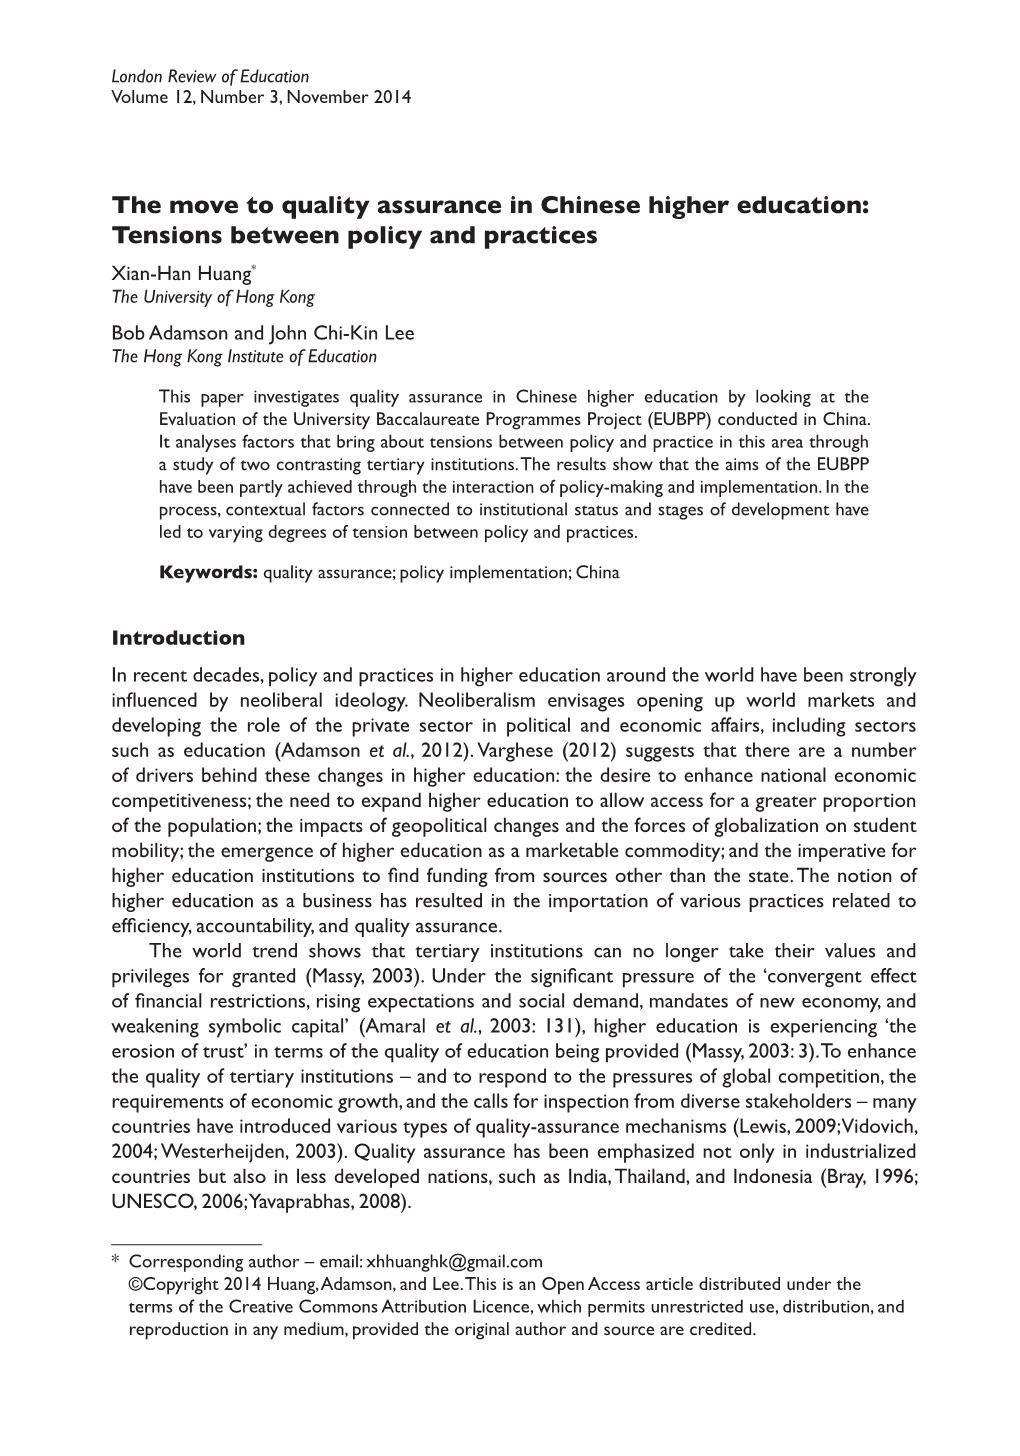 The Move to Quality Assurance in Chinese Higher Education: Tensions Between Policy and Practices